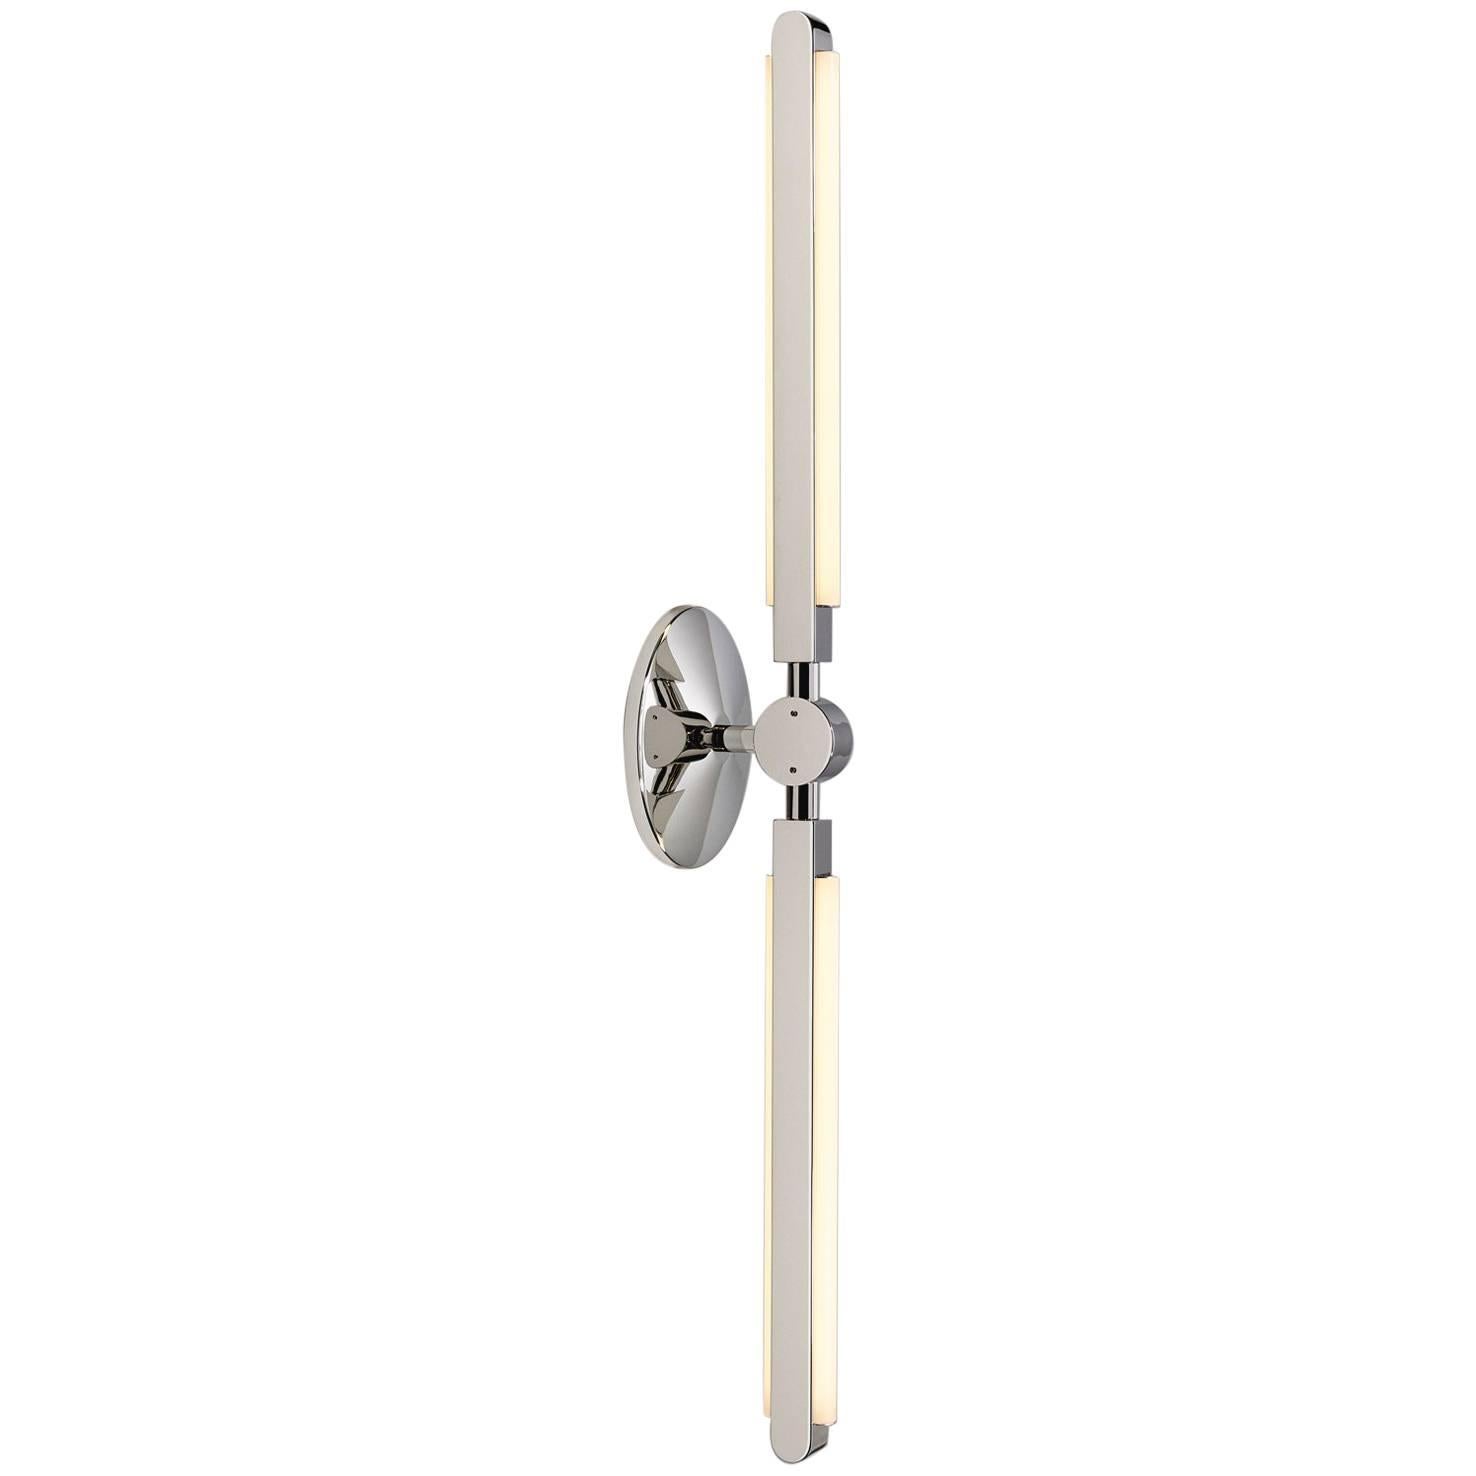 Pris Linear Sconce in Polished Nickel by PELLE